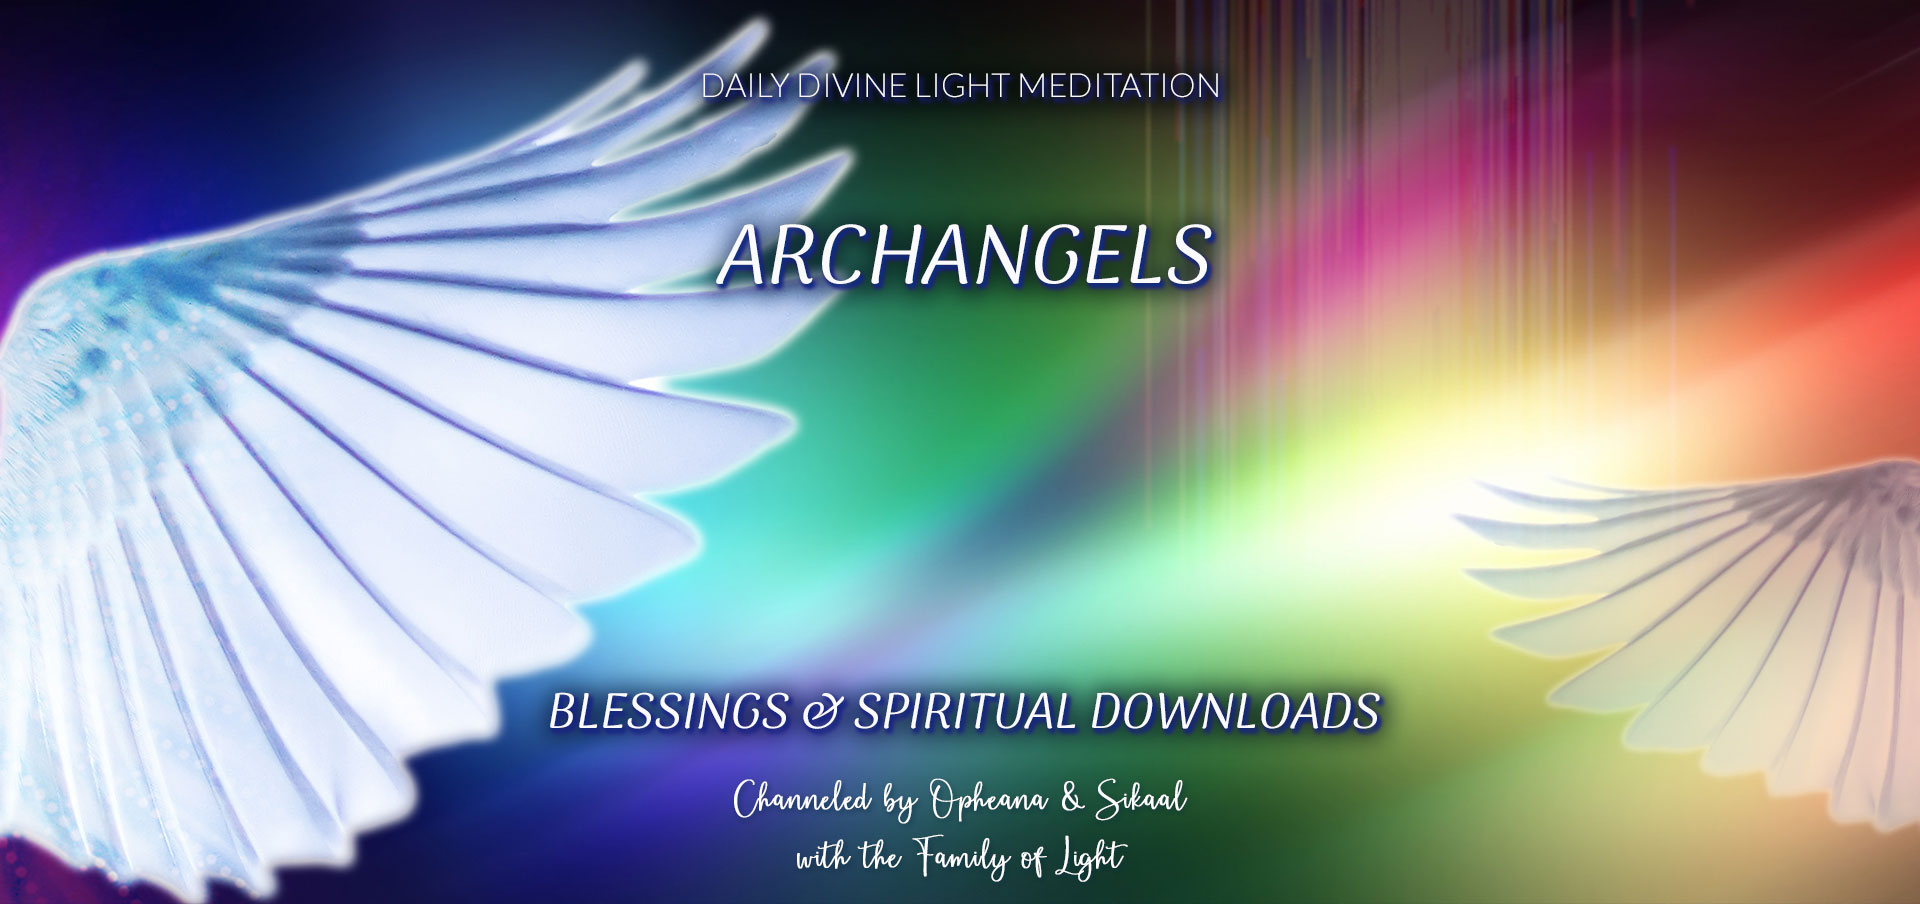 Daily Divine Light Meditation ~ Blessings & Spiritual Downloads ~ Archangels ~ Wednesday 26 July 2023